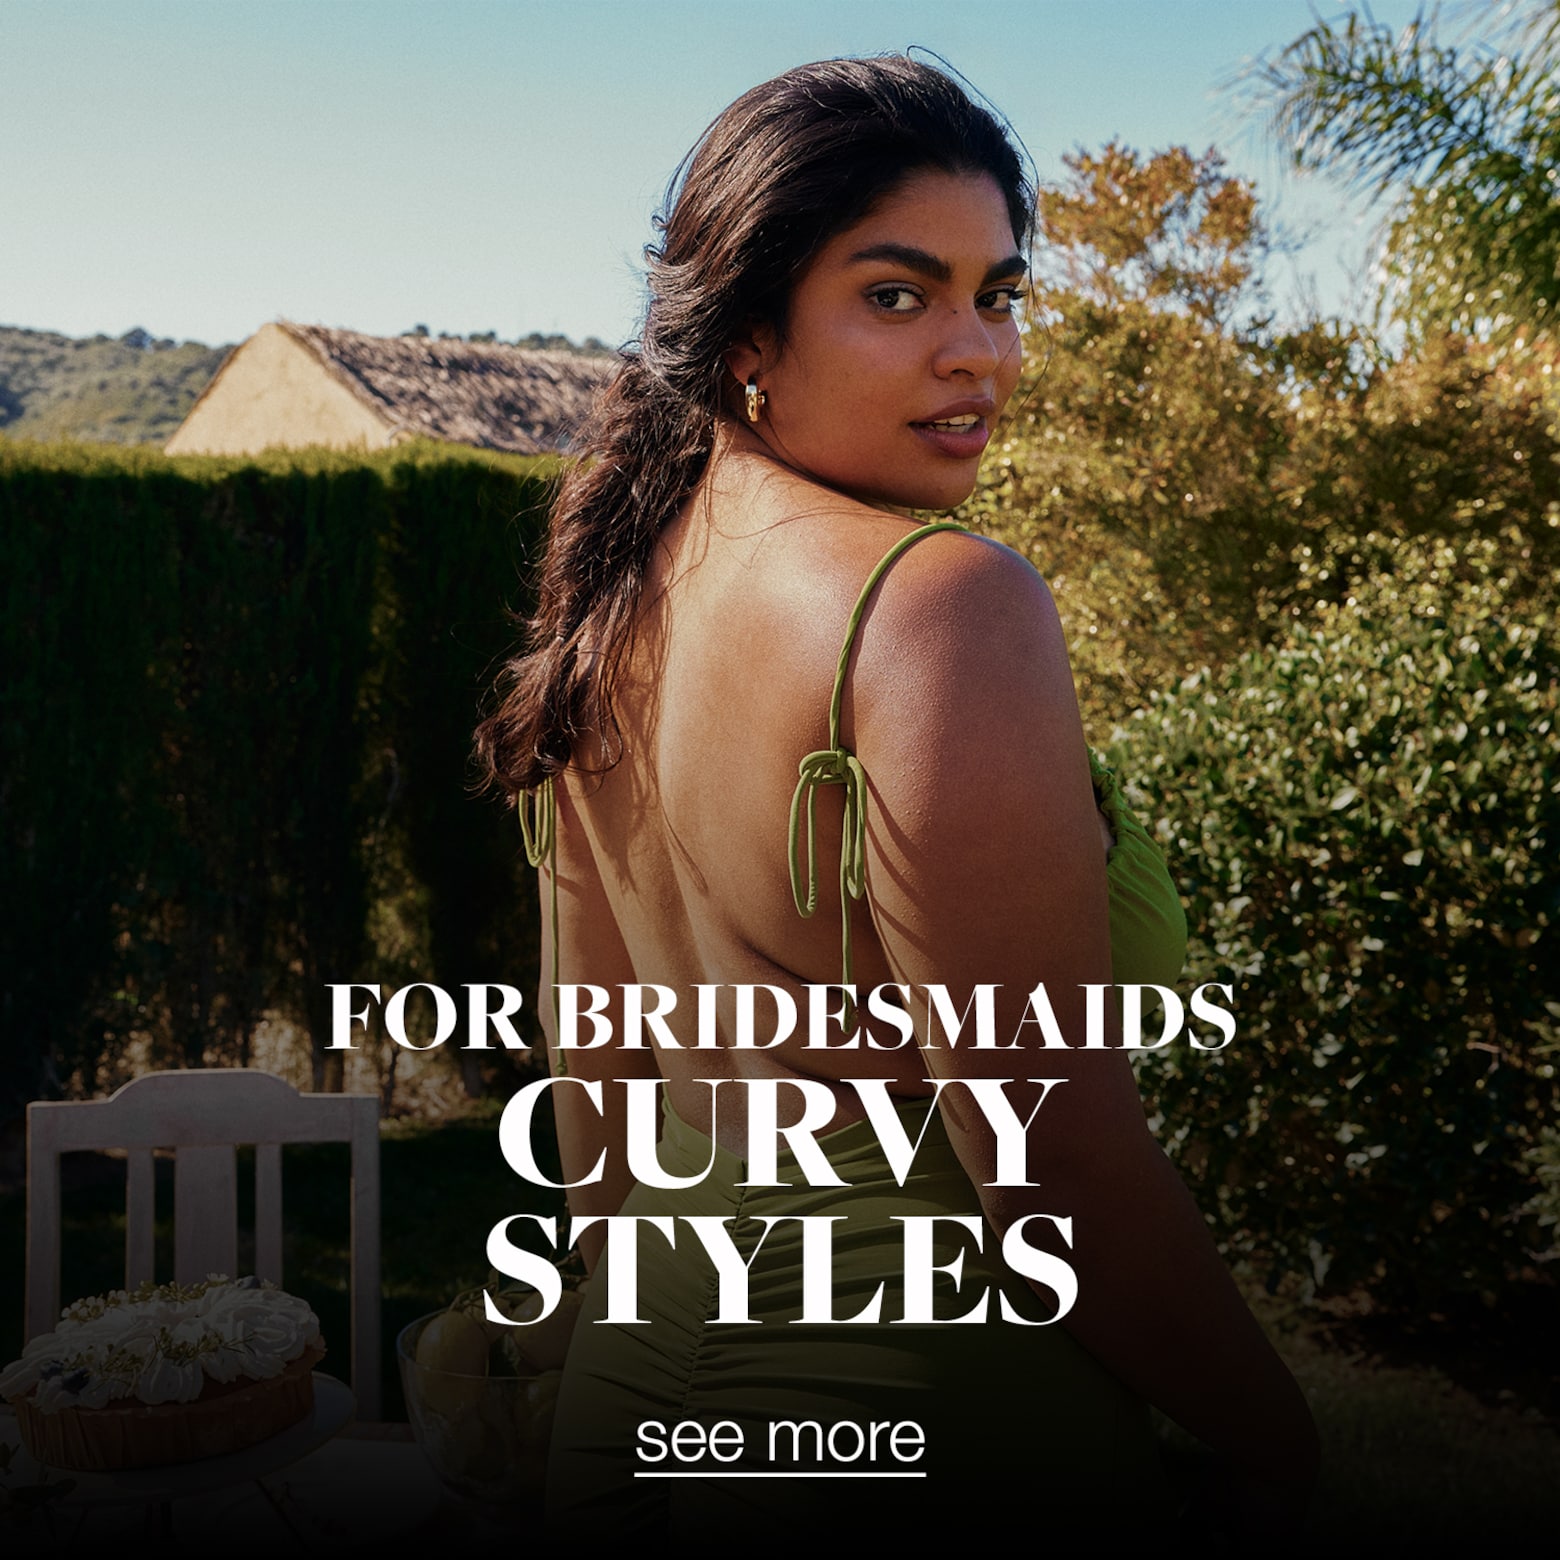 Our curated selection The bridesmaid shop